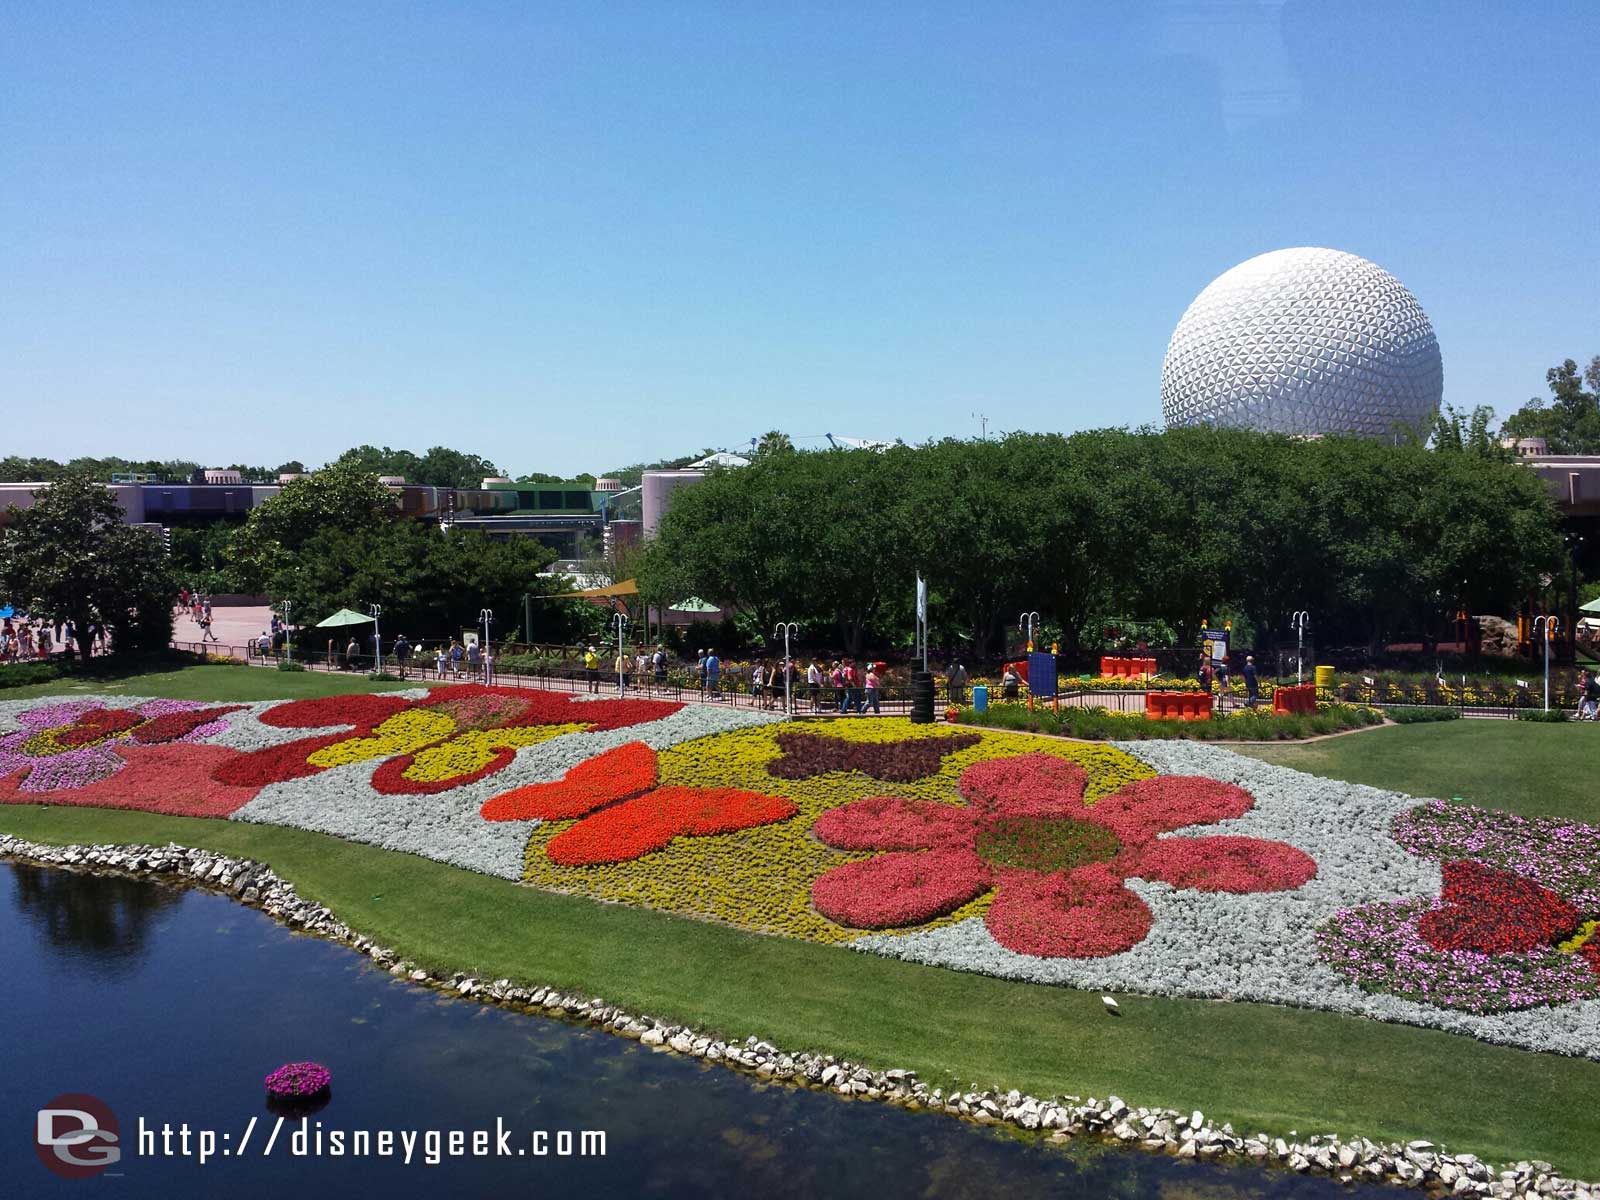 The view from onboard the Monorail of the flower beds with Spaceship Earth in the background - Epcot International Flower & Garden Festival